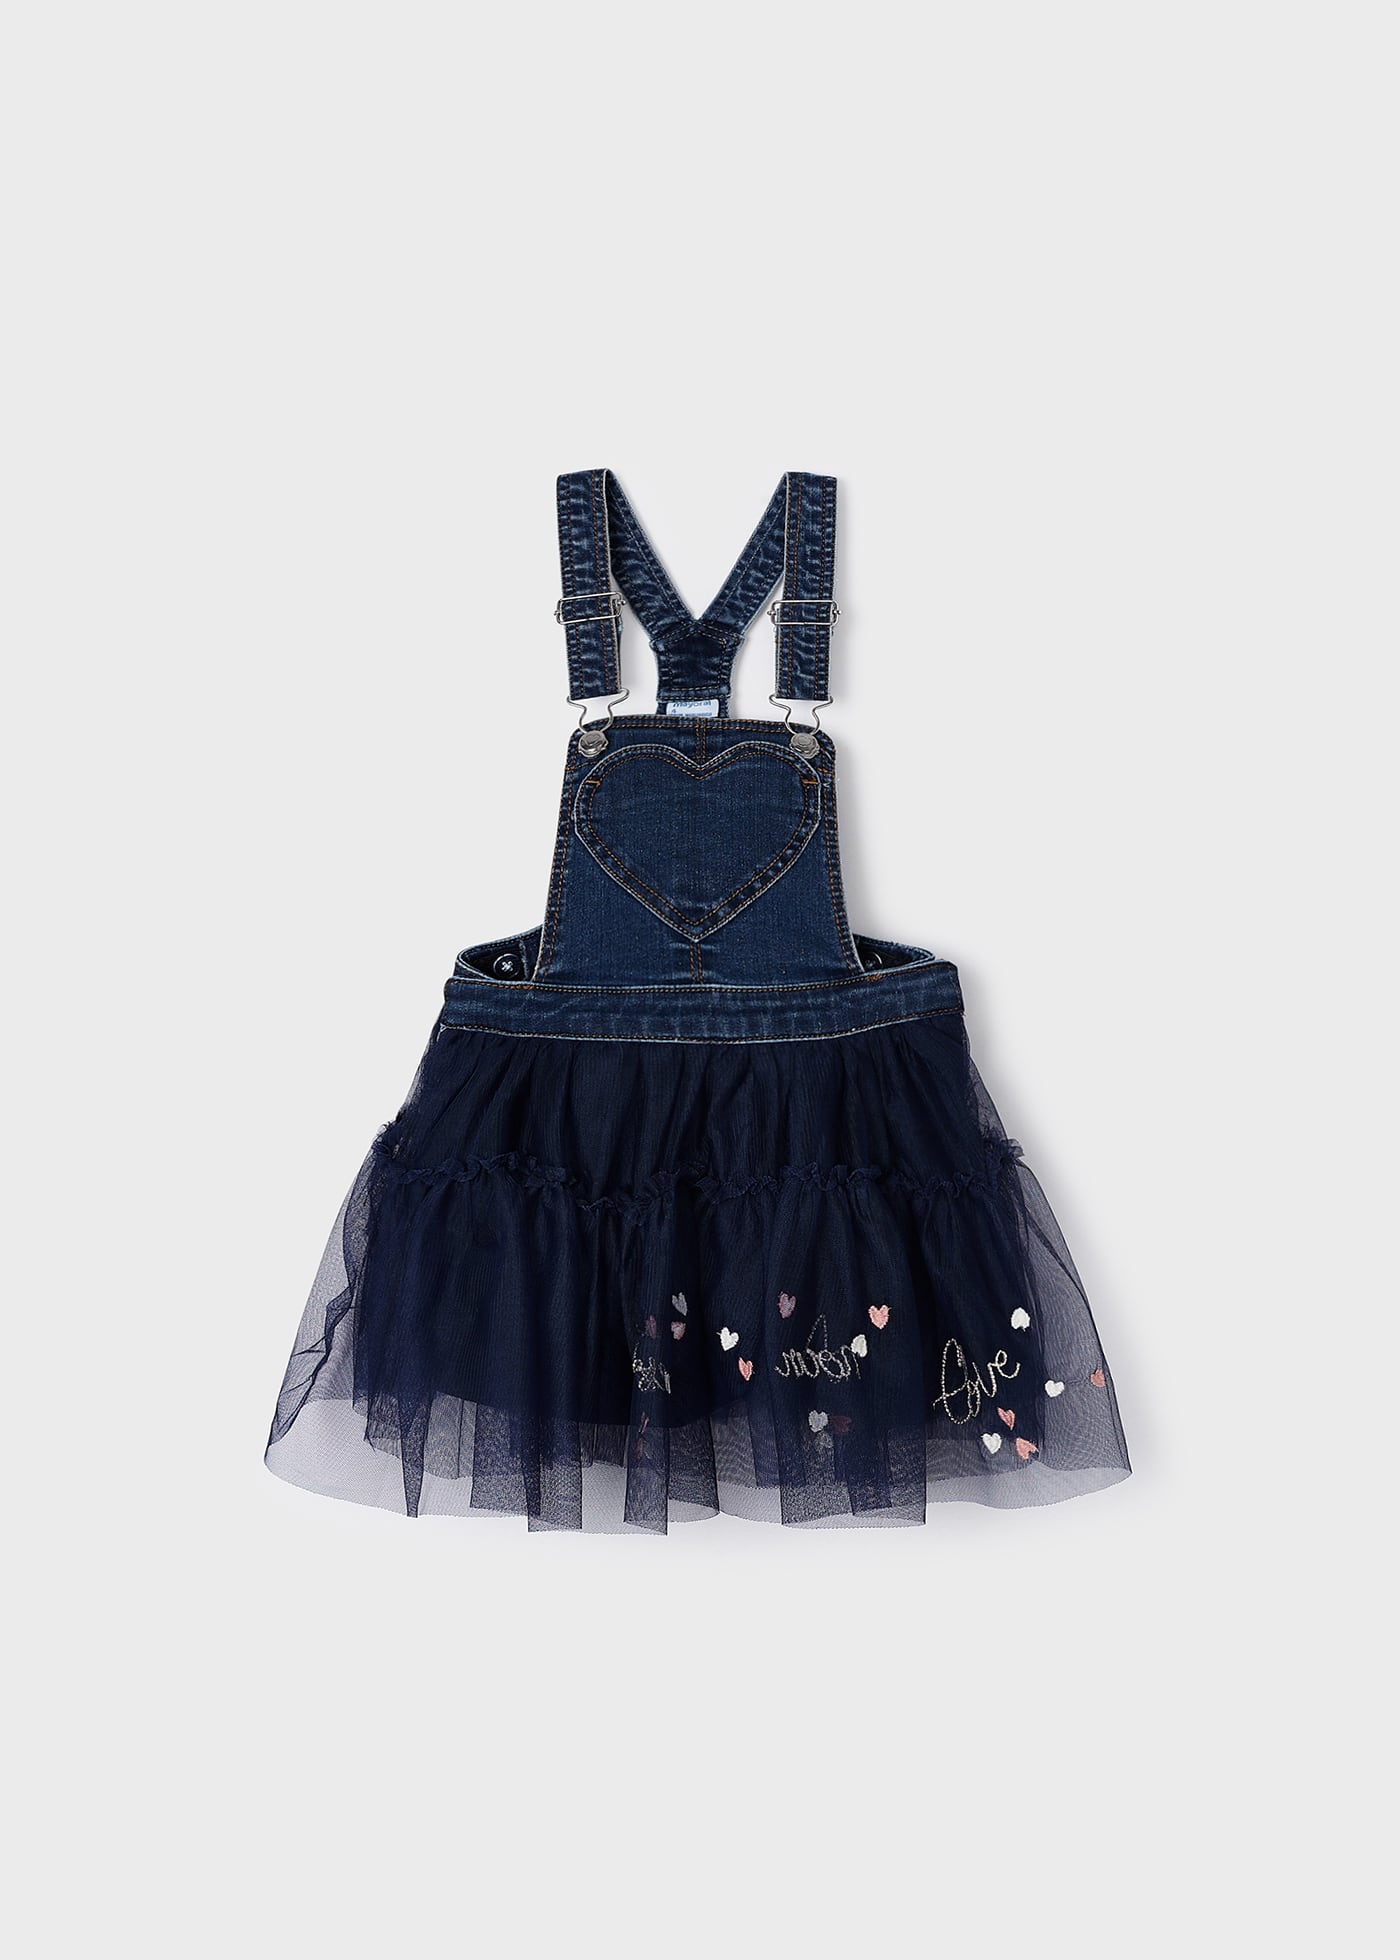 https://assets.mayoral.com/images/t_auto_img,f_auto,c_limit,w_1920/v1690800380/13-04909-052-XL-4/girl-denim-skirt-dungarees-with-tulle-medium-jeans-XL-4.jpg